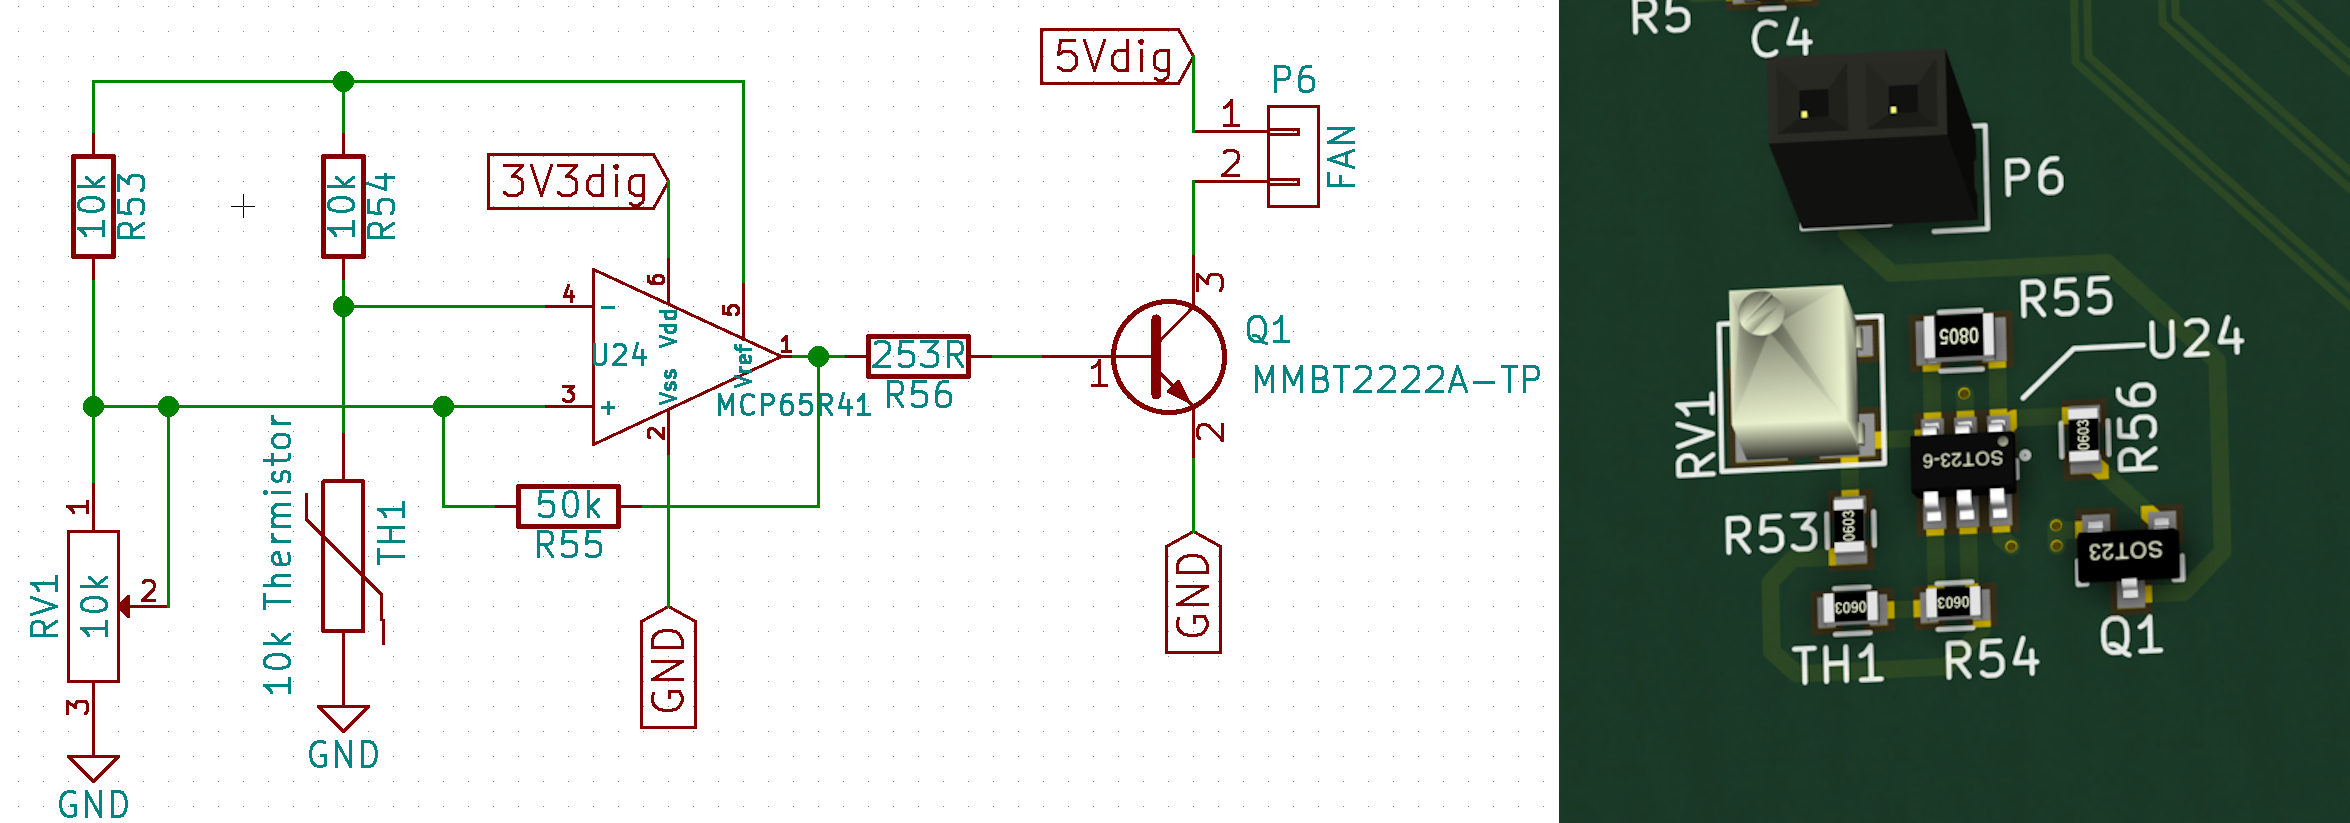 The fan control circuit. The FPGA, ADCs, and other electronics will potentially consume several watts of power. To allow for continuous operation within a case, it was decided to add a fan controller to the board. This would regulate the speed of a chassis mounted fan in accordance with a reading from a thermistor on the board.